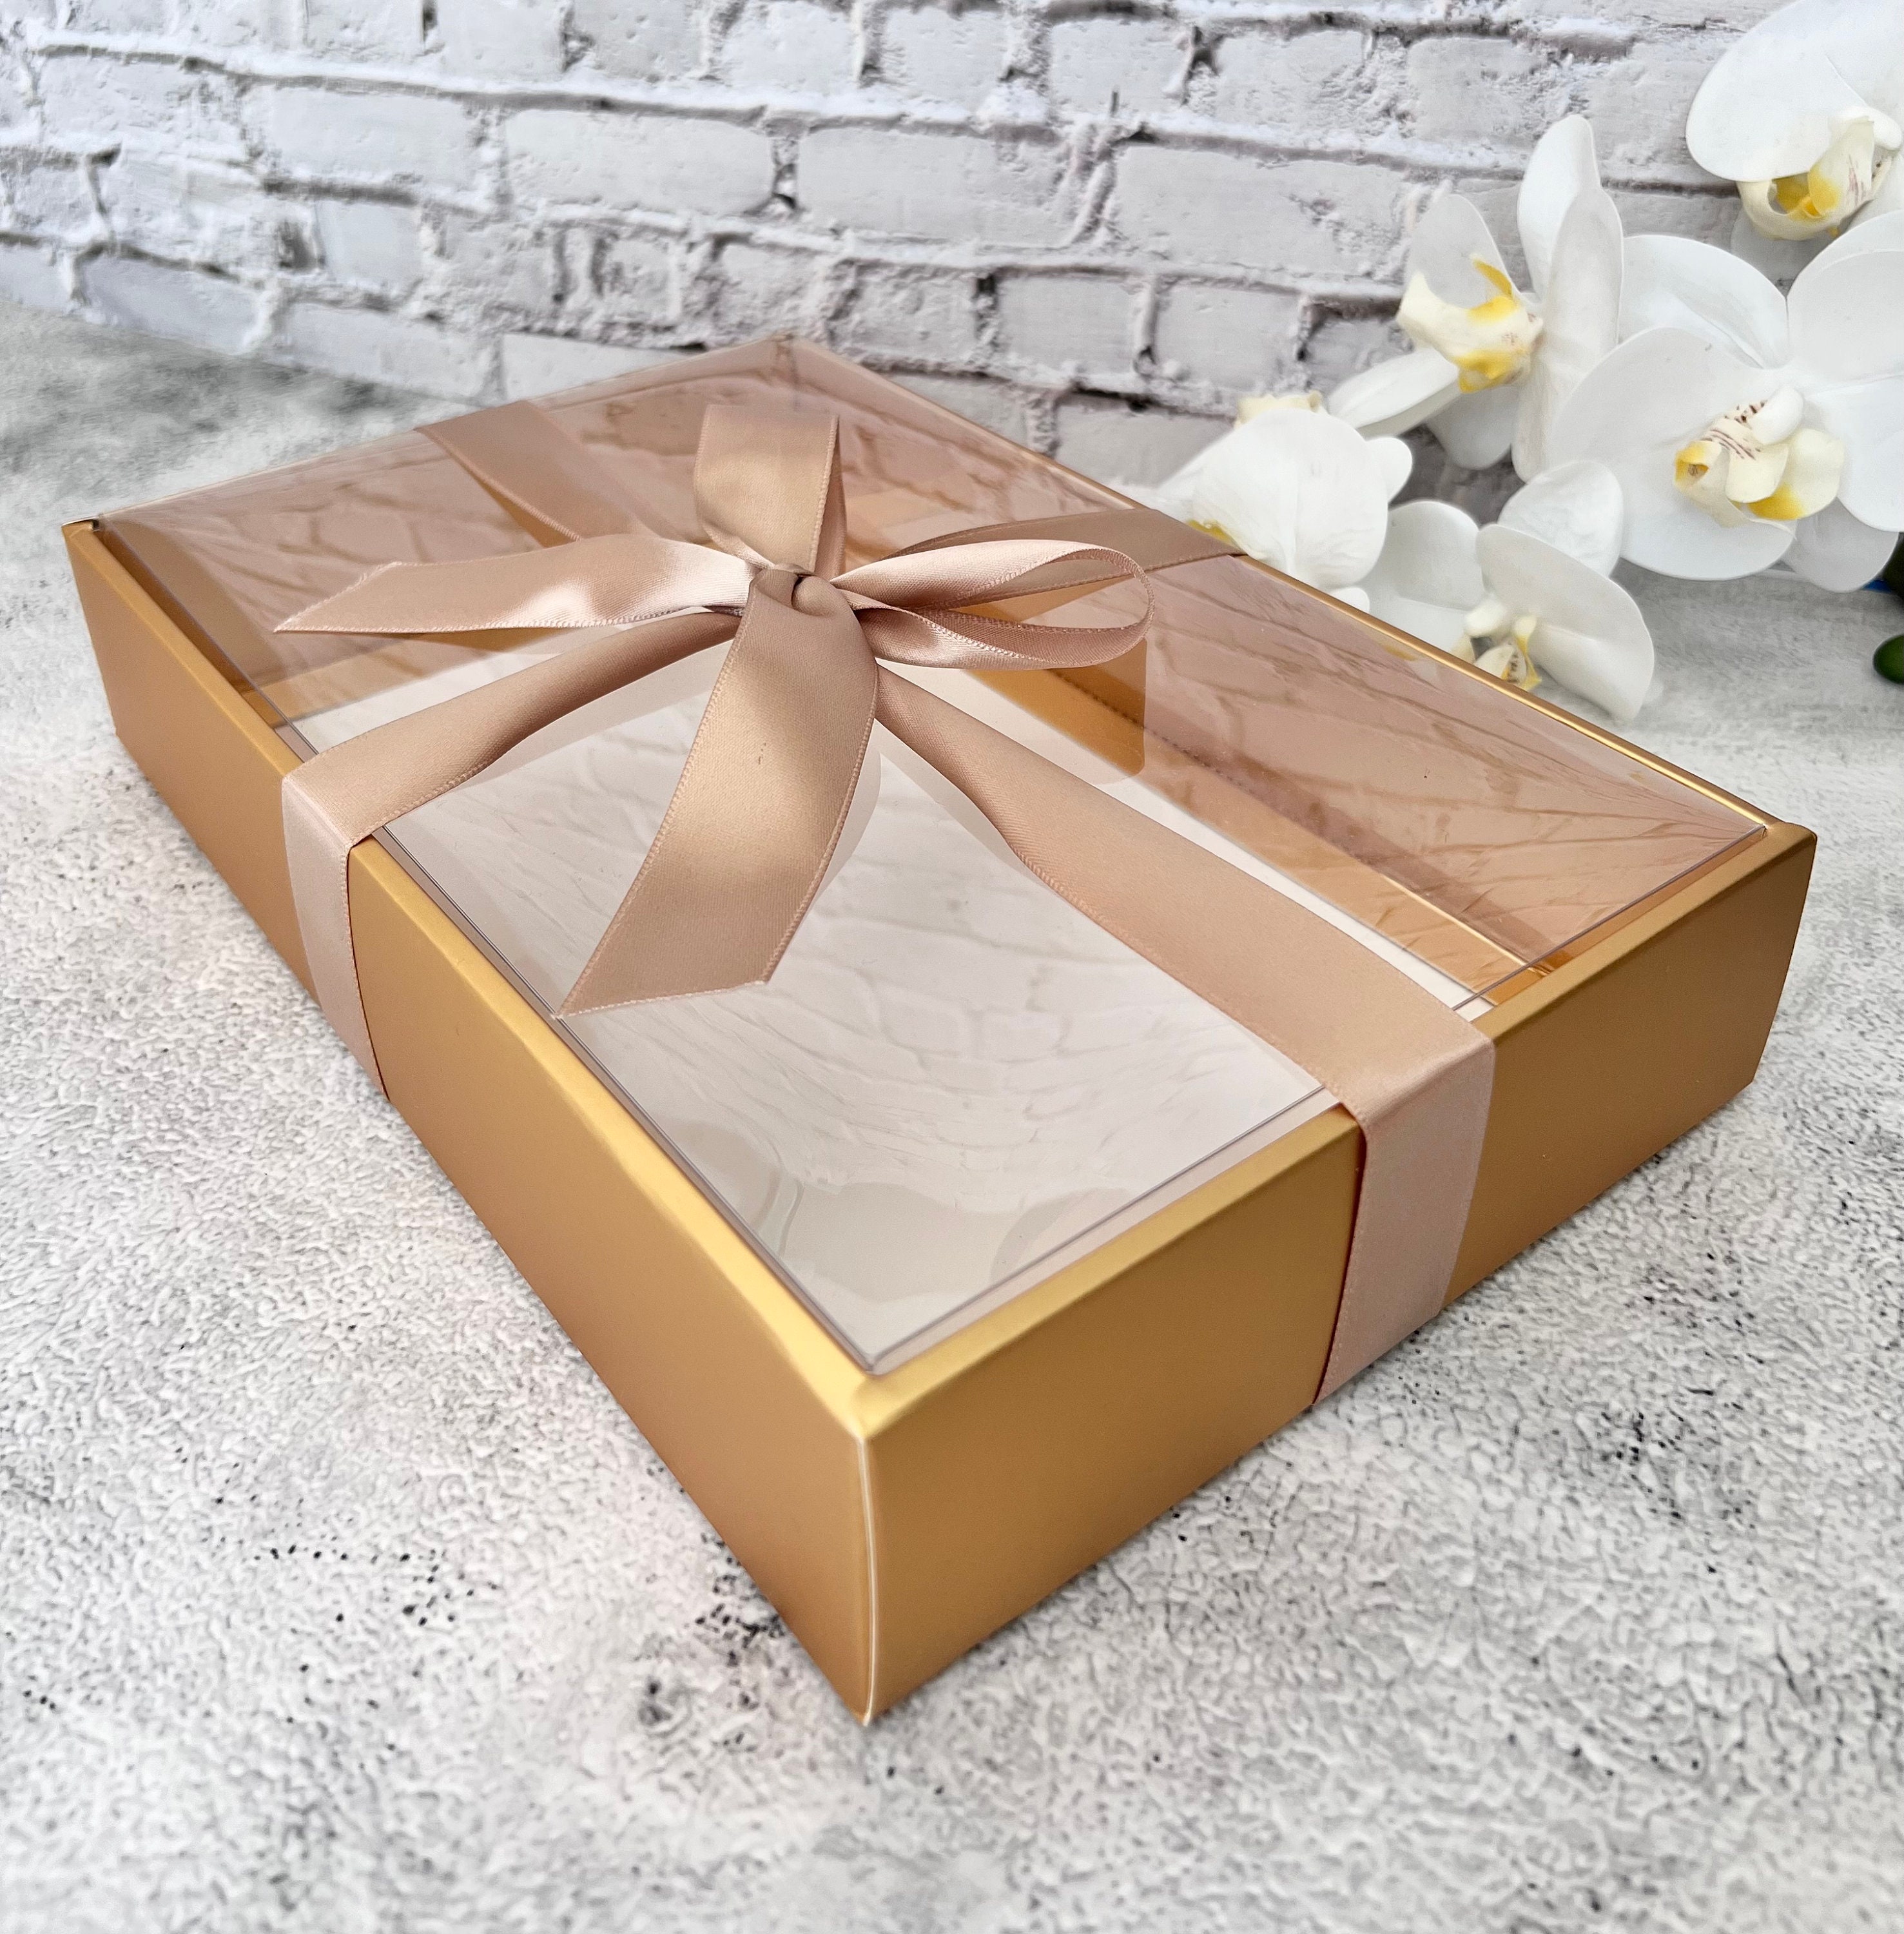 Large White Flat-packed recycled gift box with clear lid 165 x 125 x 50mm  (CLRWH165)